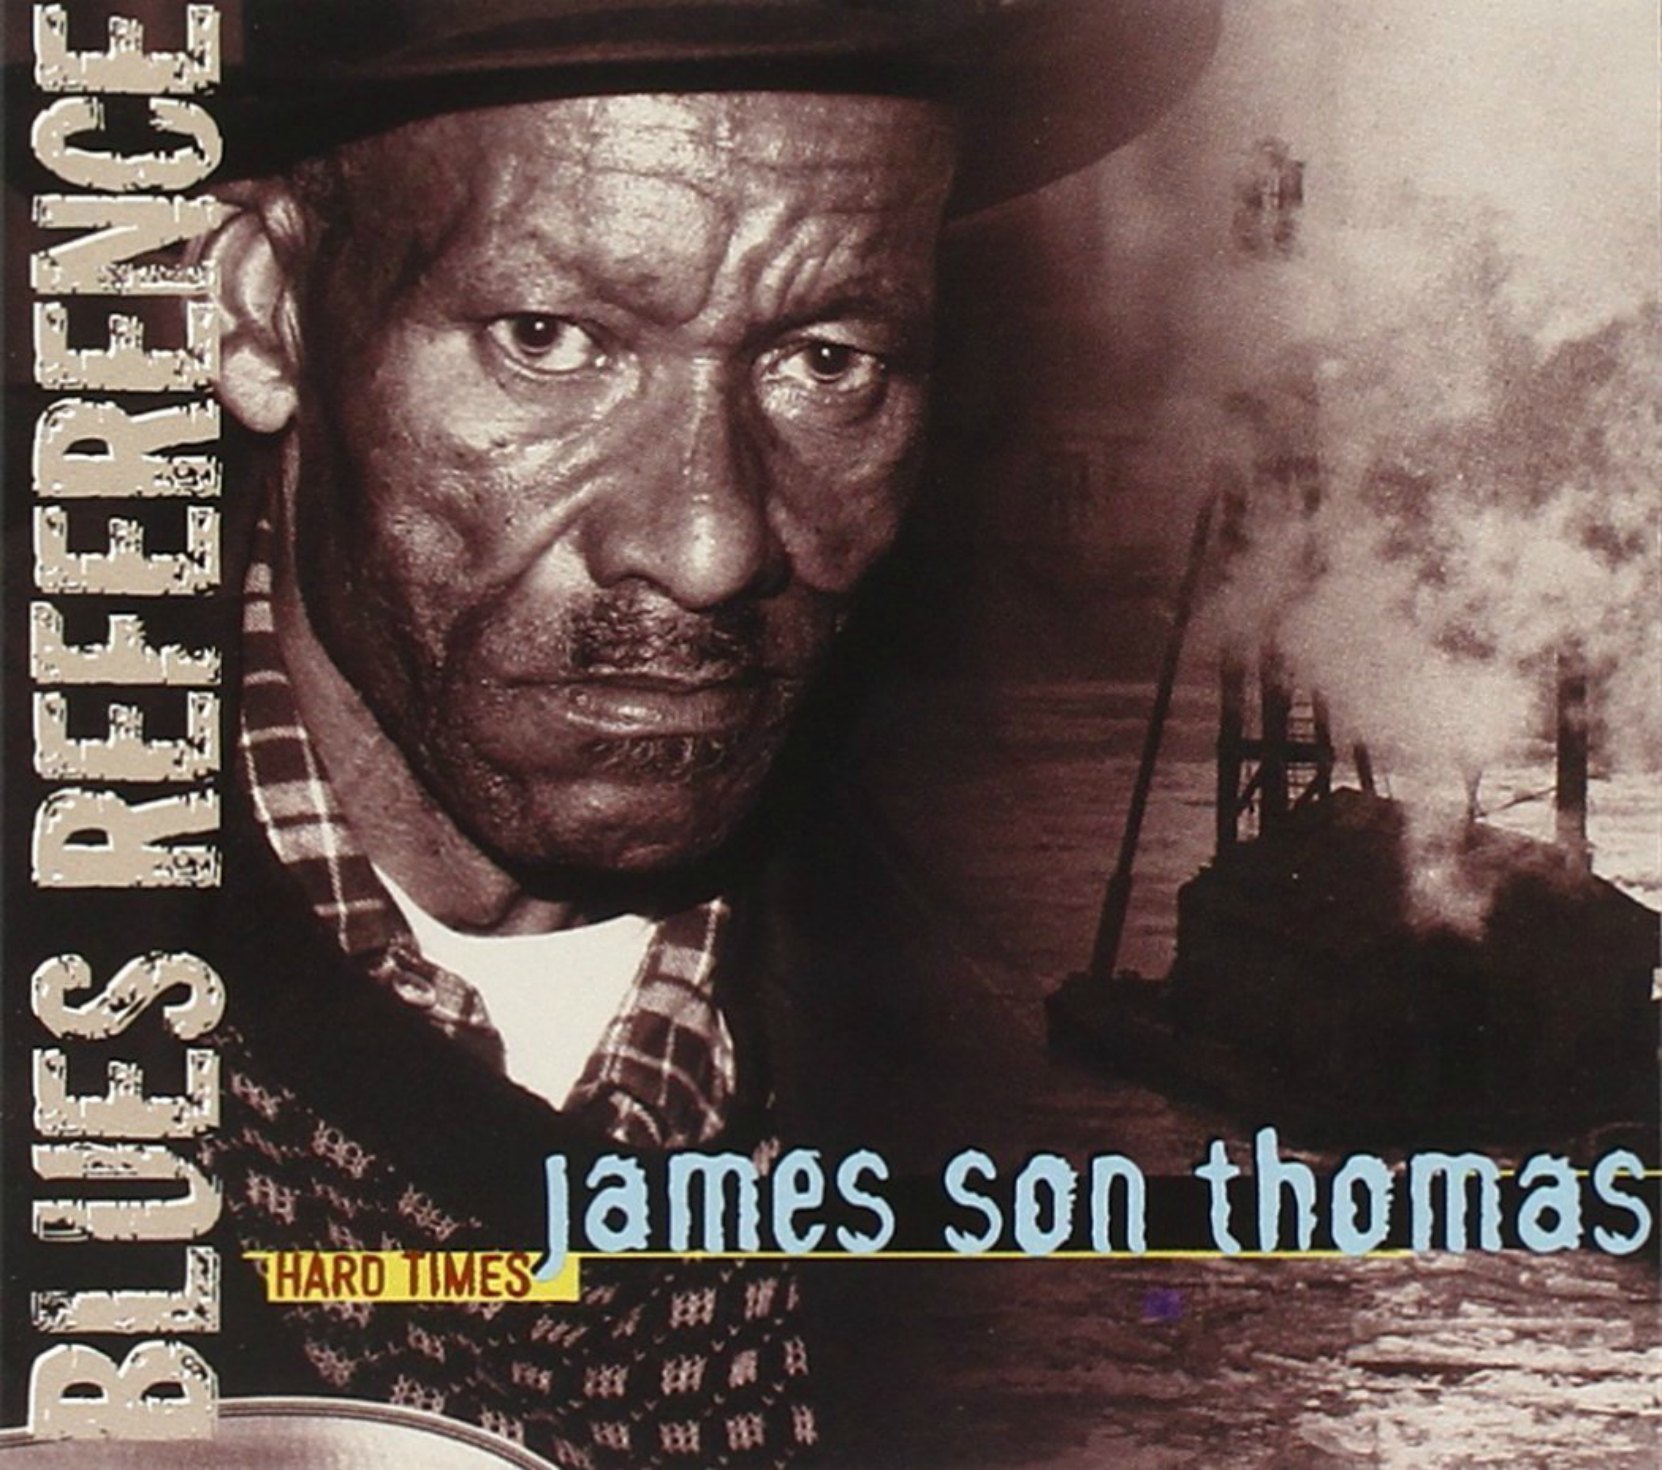 CD cover, James "Son" Thomas, Hard Times, recorded in 1986